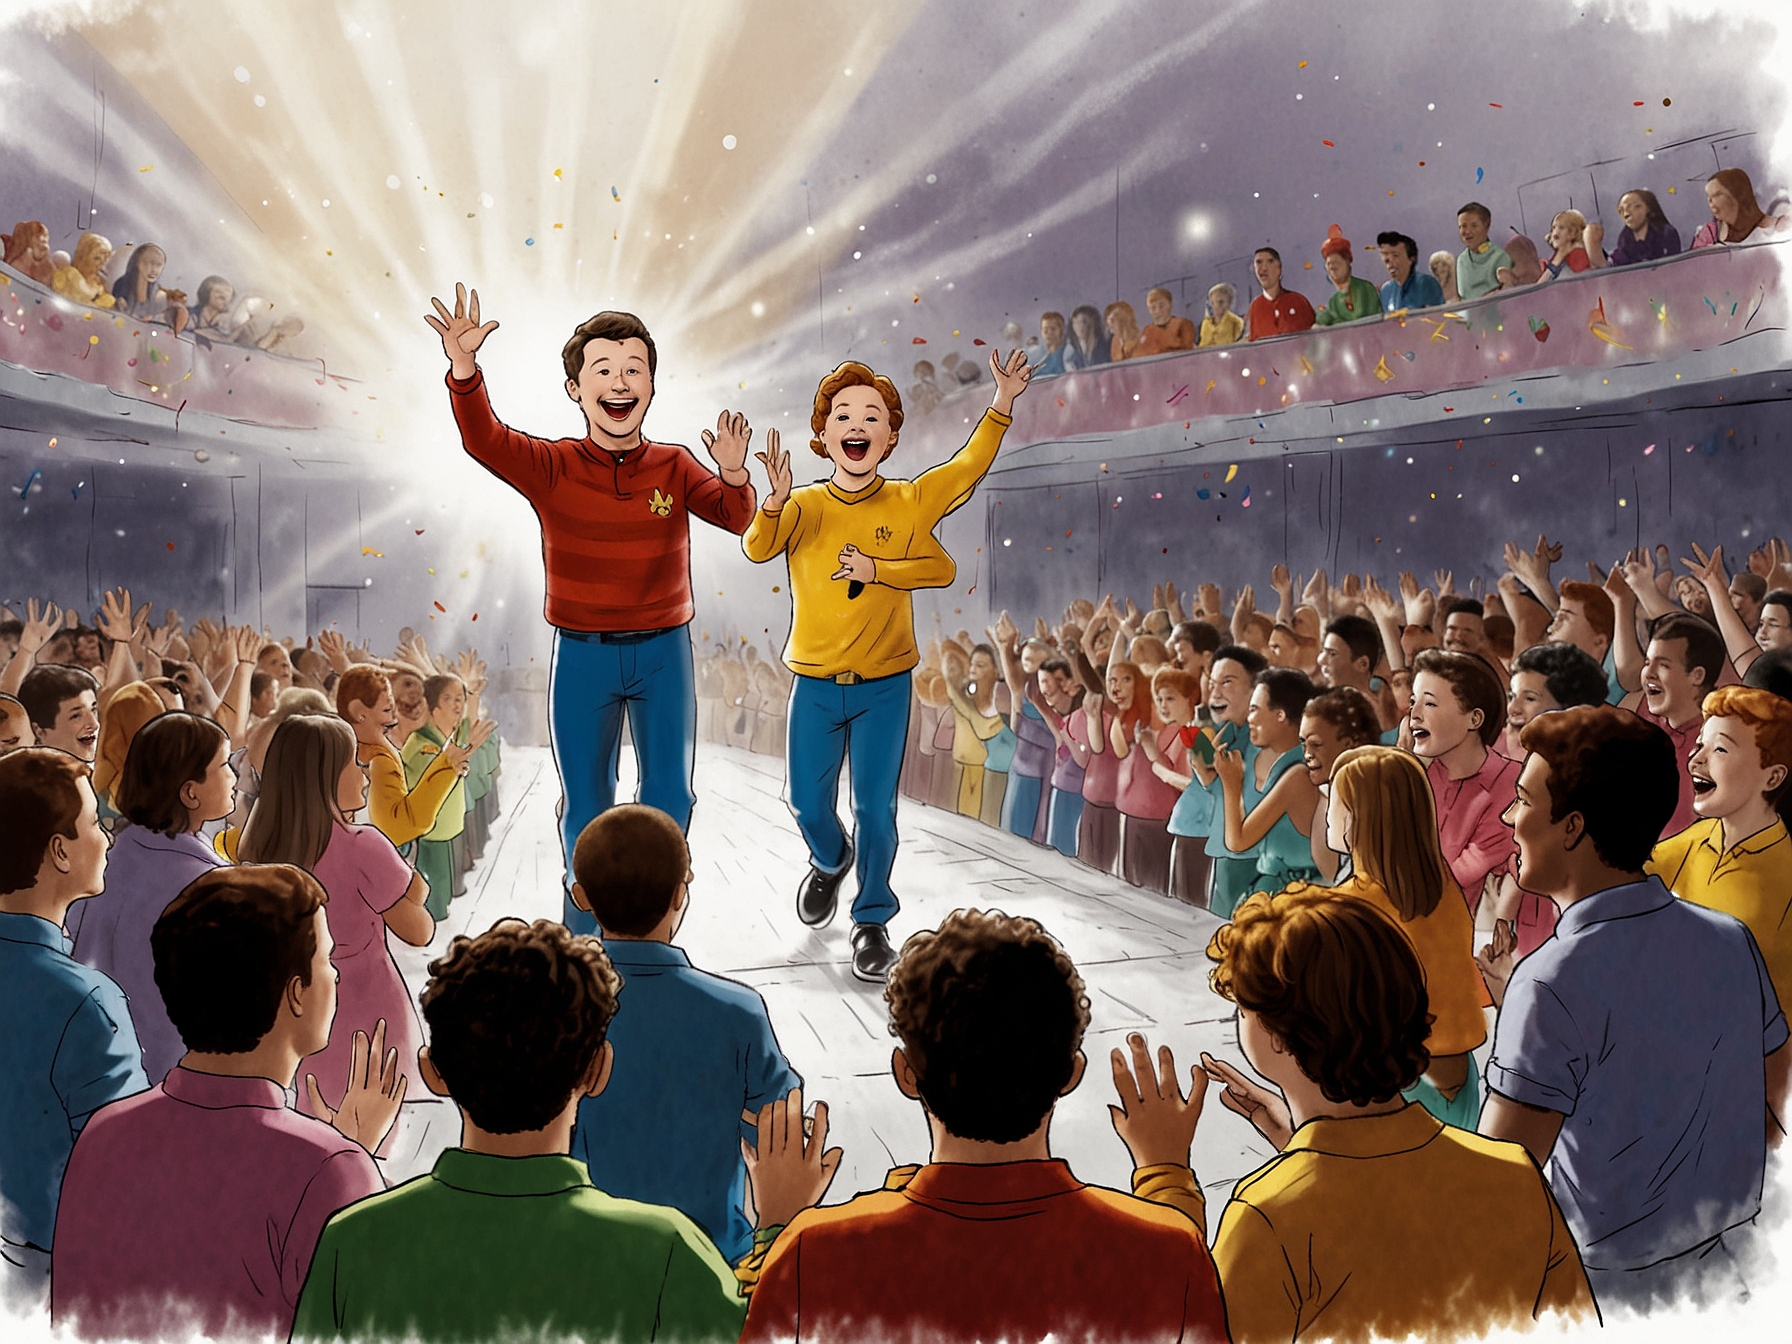 An illustration of The Wiggles performing on stage with an audience of children and parents, capturing the celebratory and joyful atmosphere following the star's personal news.